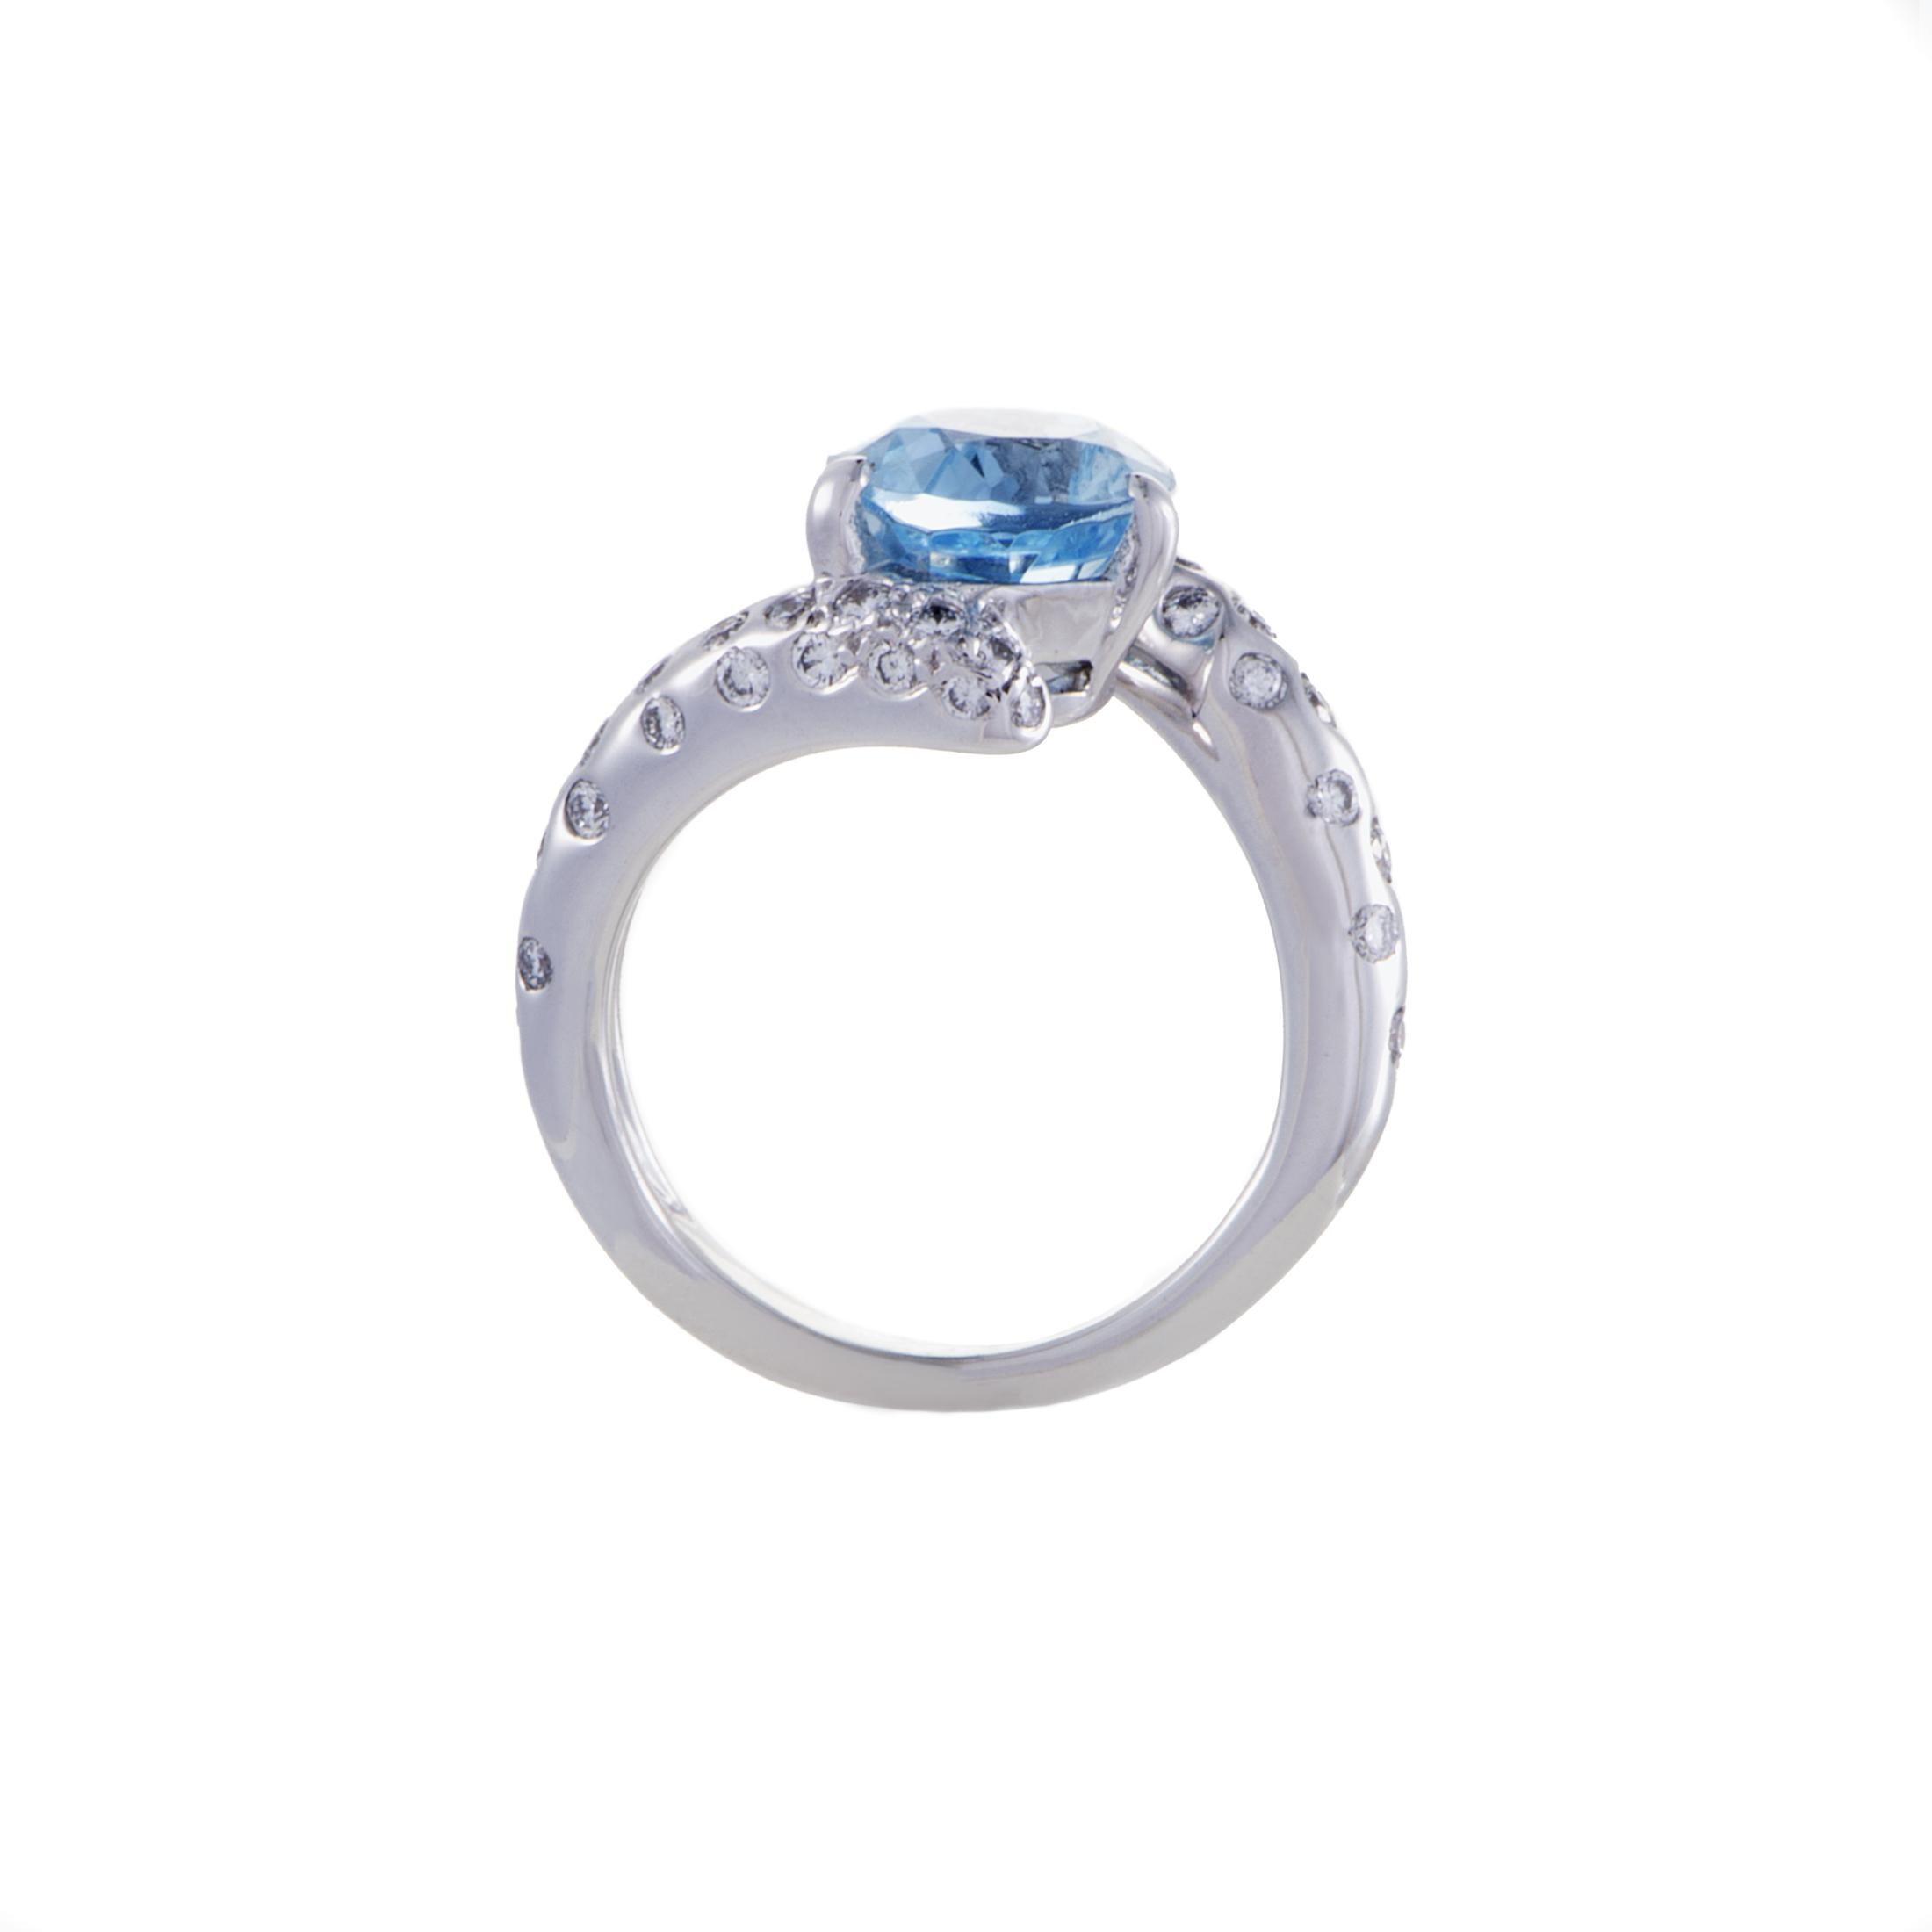 Lustrous diamonds are scattered along the immaculately gleaming surface of splendid 18K white gold in this charming ring from Chanel topped off with an astonishing aquamarine that exudes a refreshing glisten and pleasant color. 
Ring Top Dimensions: